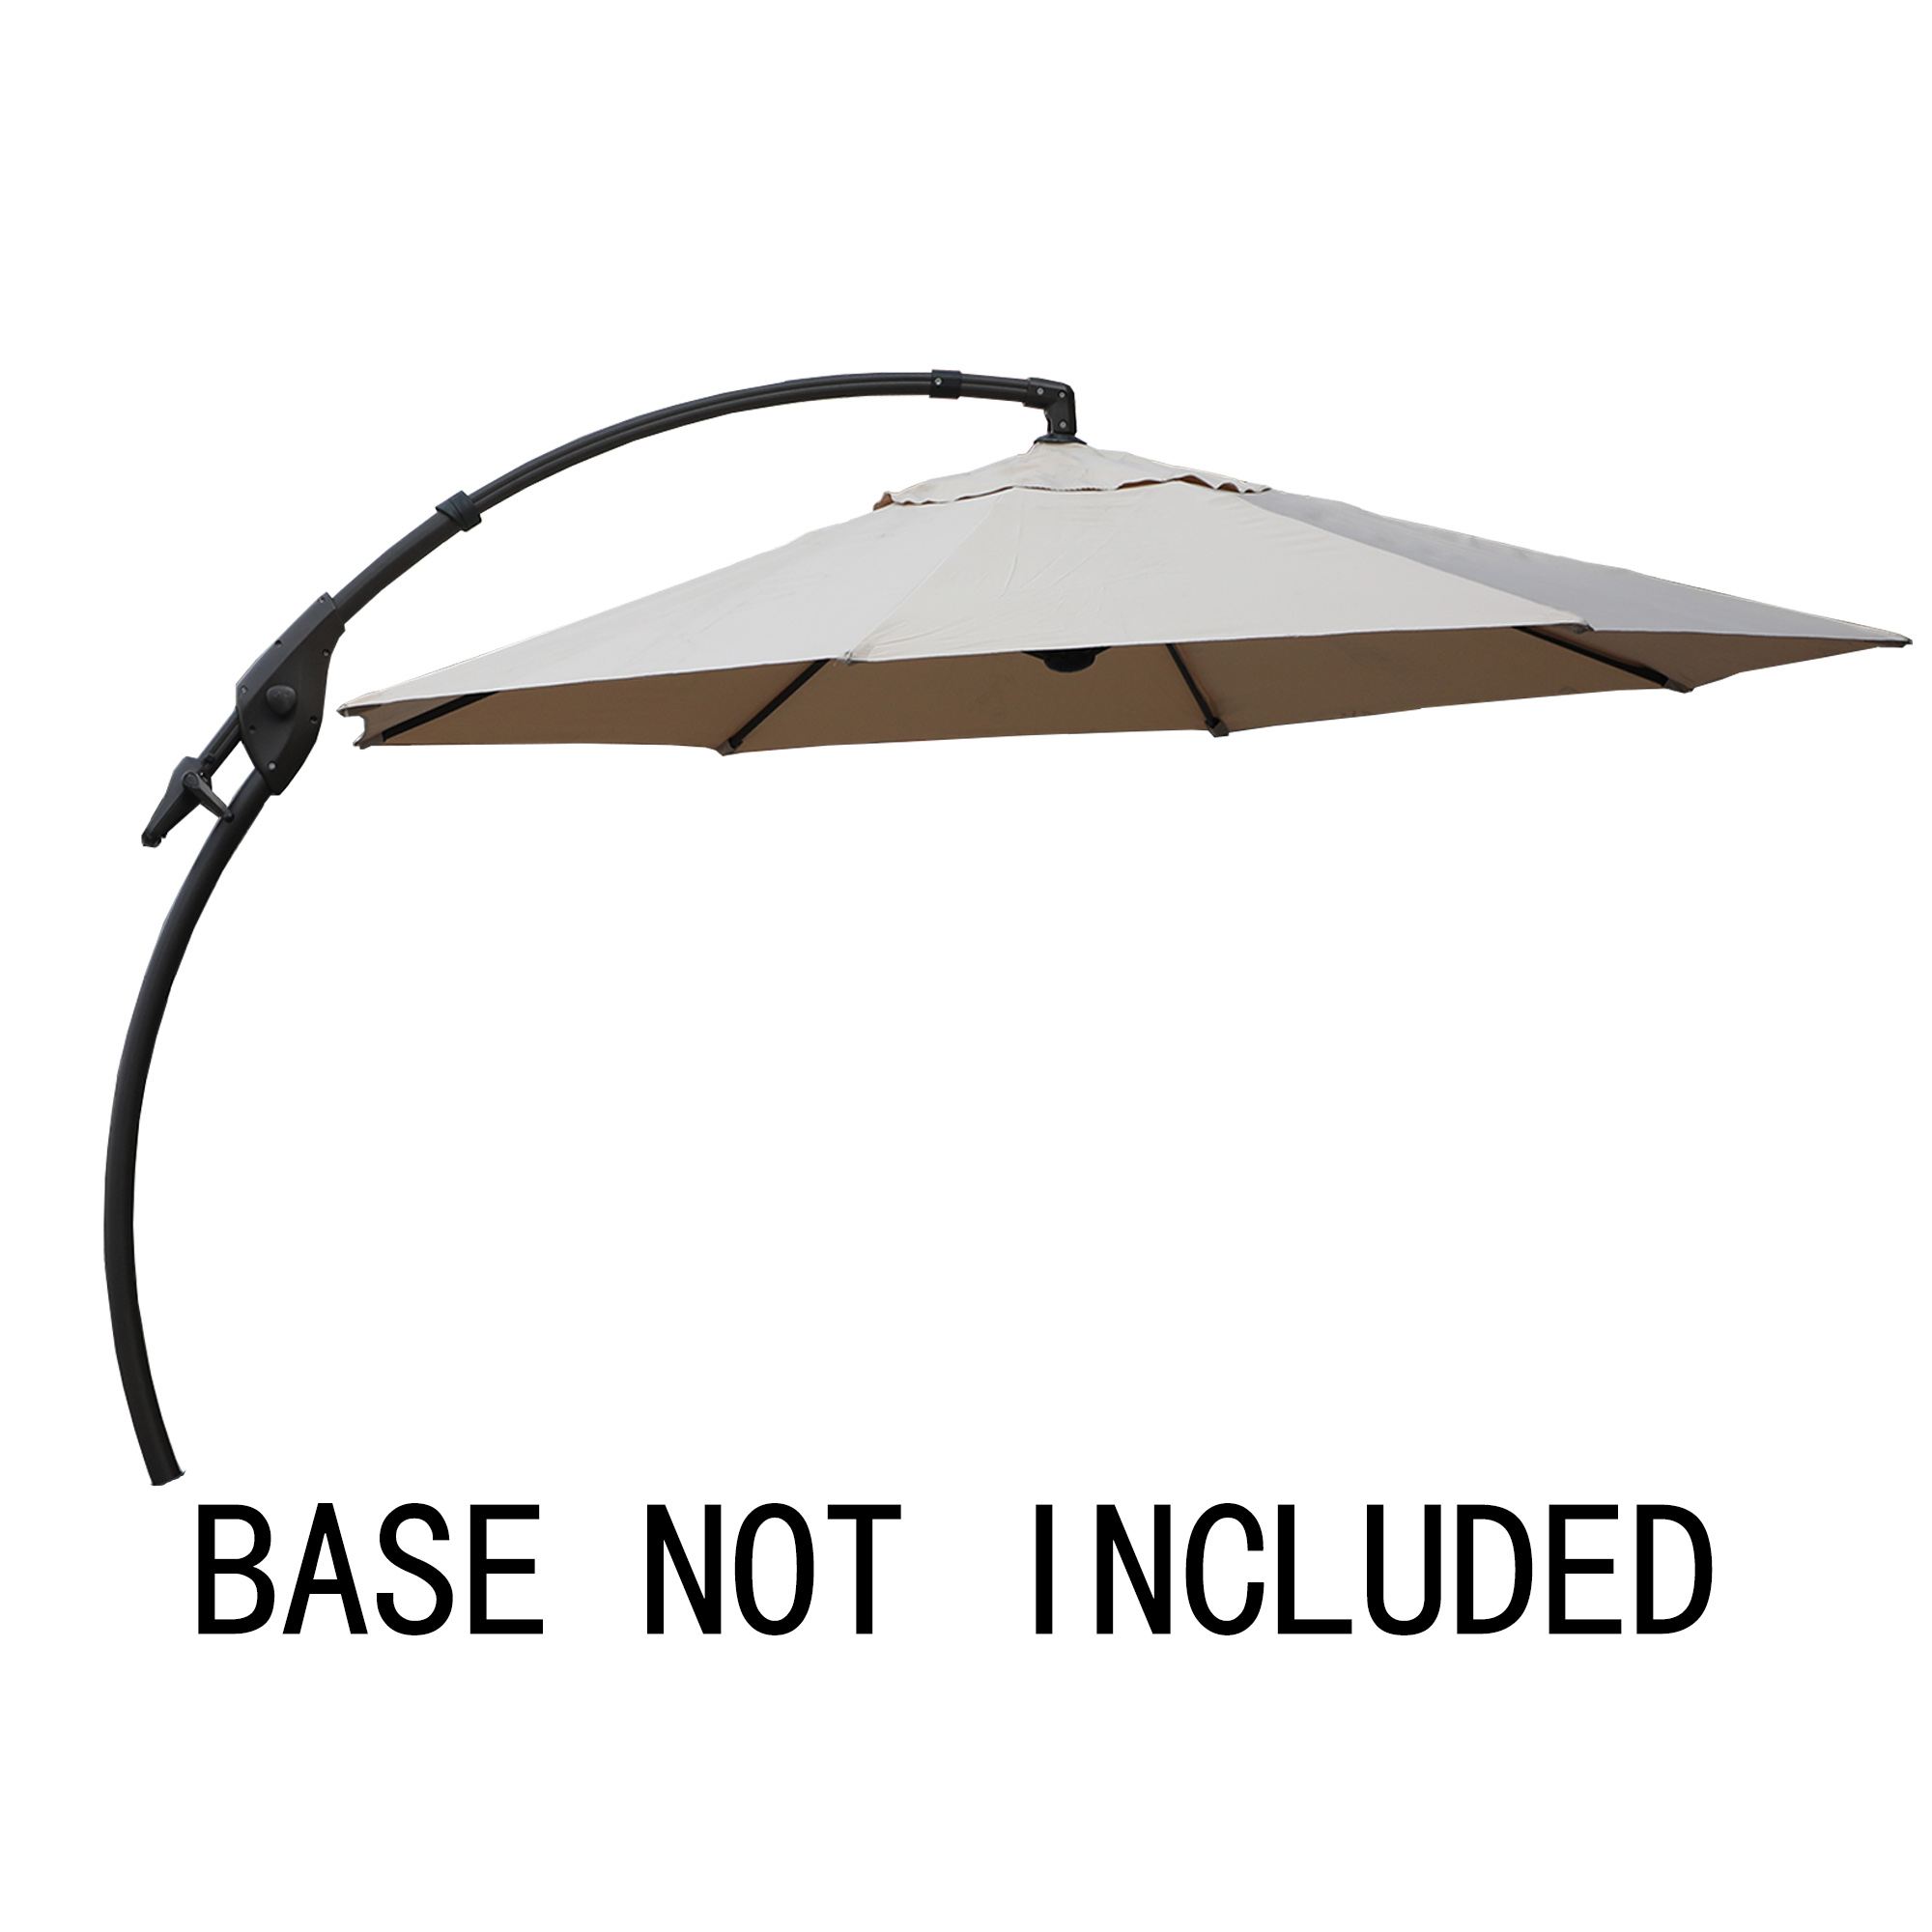 Umbrella for After Sale - Base Not Included 